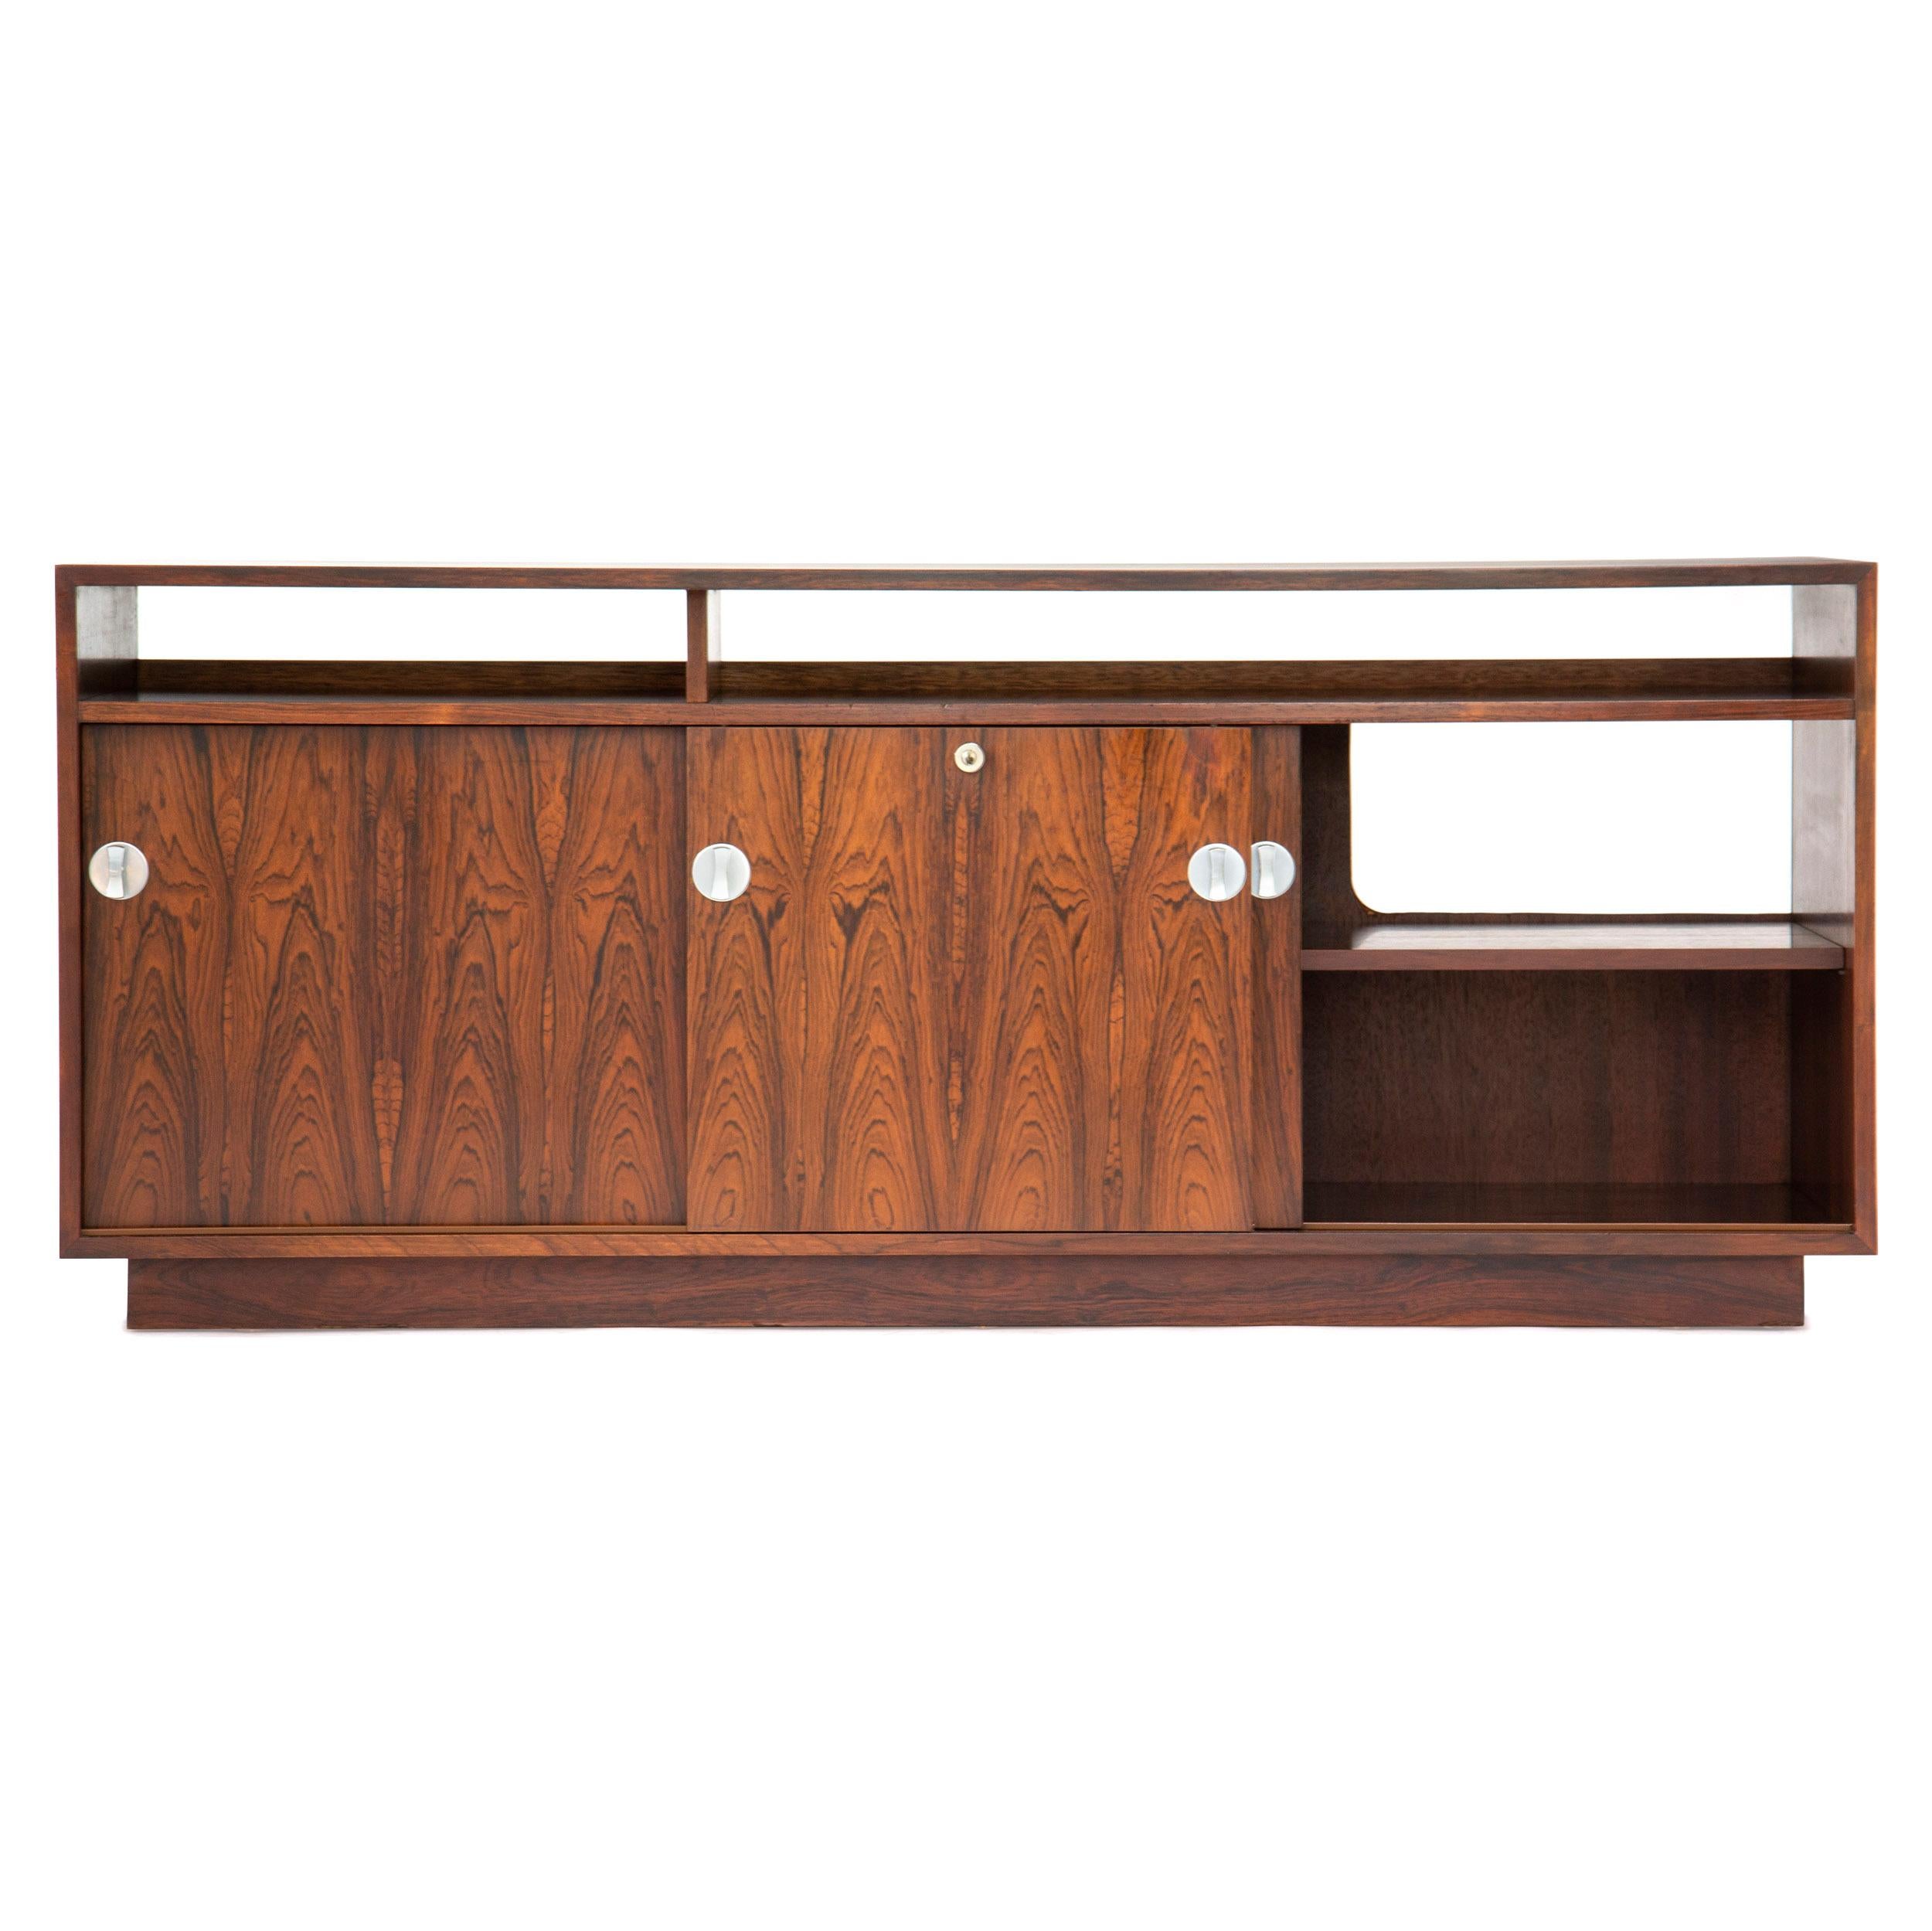 A credenza on a plinth base with a divided, open top shelf and having three sliding doors with aluminum bow-tie hardware. Part of the 'Cresco' modular wall unit. Can be combined with other 'Cresco' pieces.